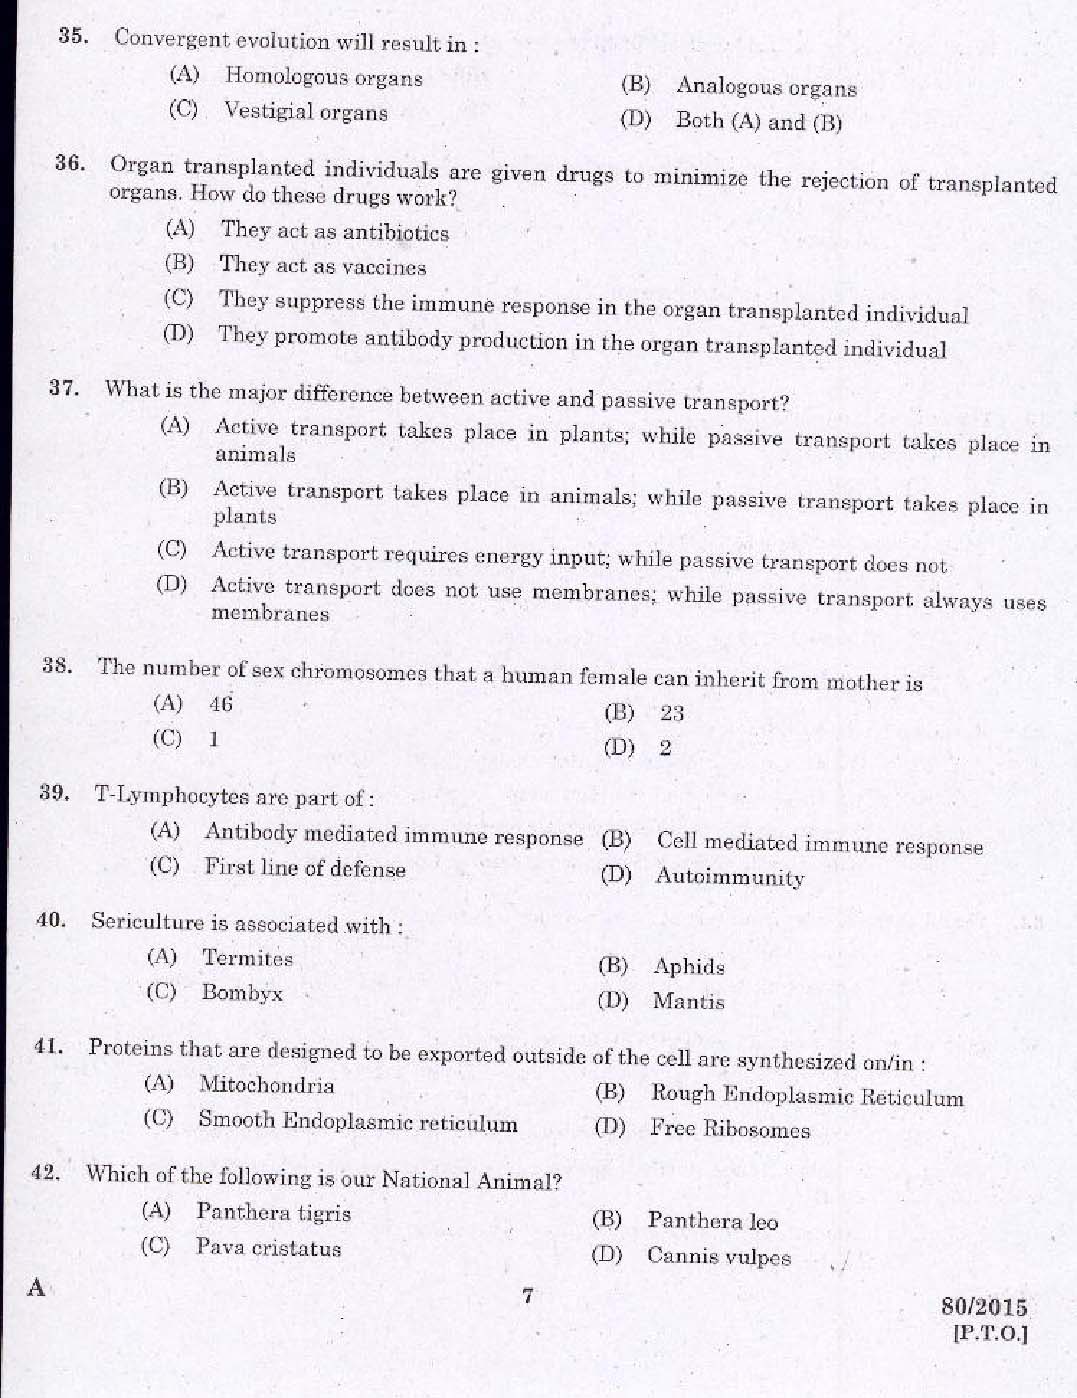 Kerala PSC Station Officer Exam Question Code 802015 5